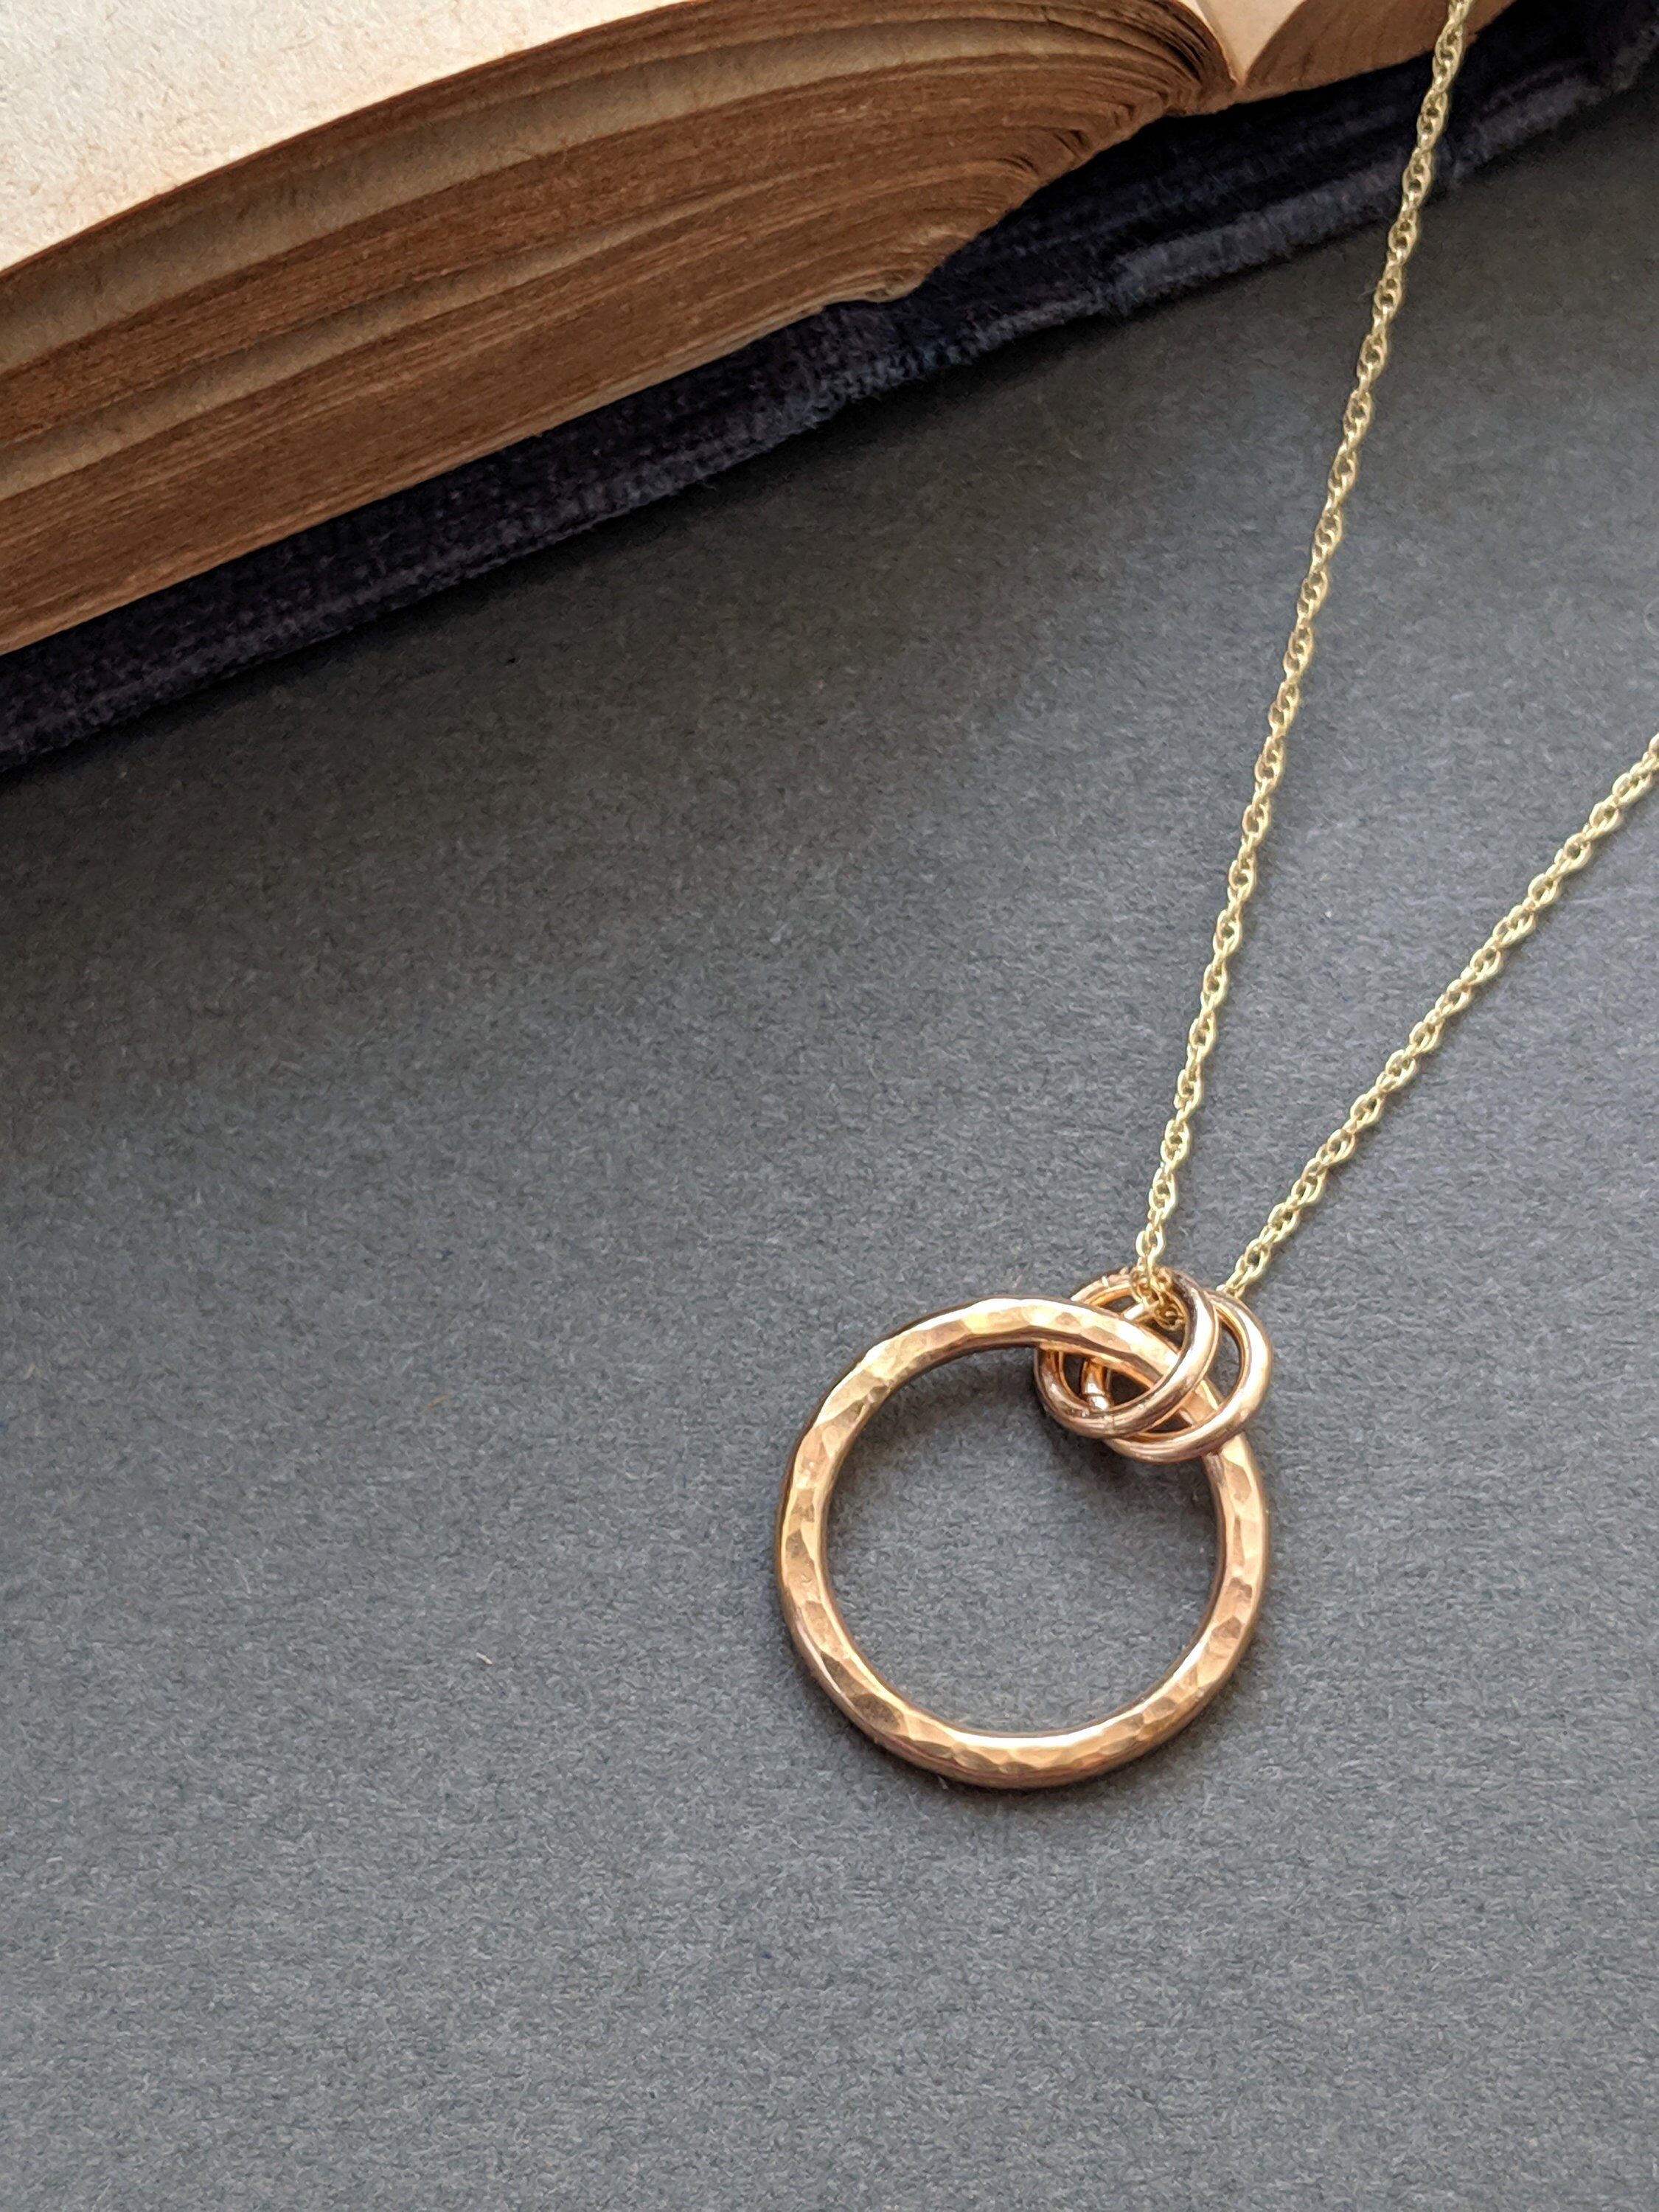 Small Gold Hoop Necklace